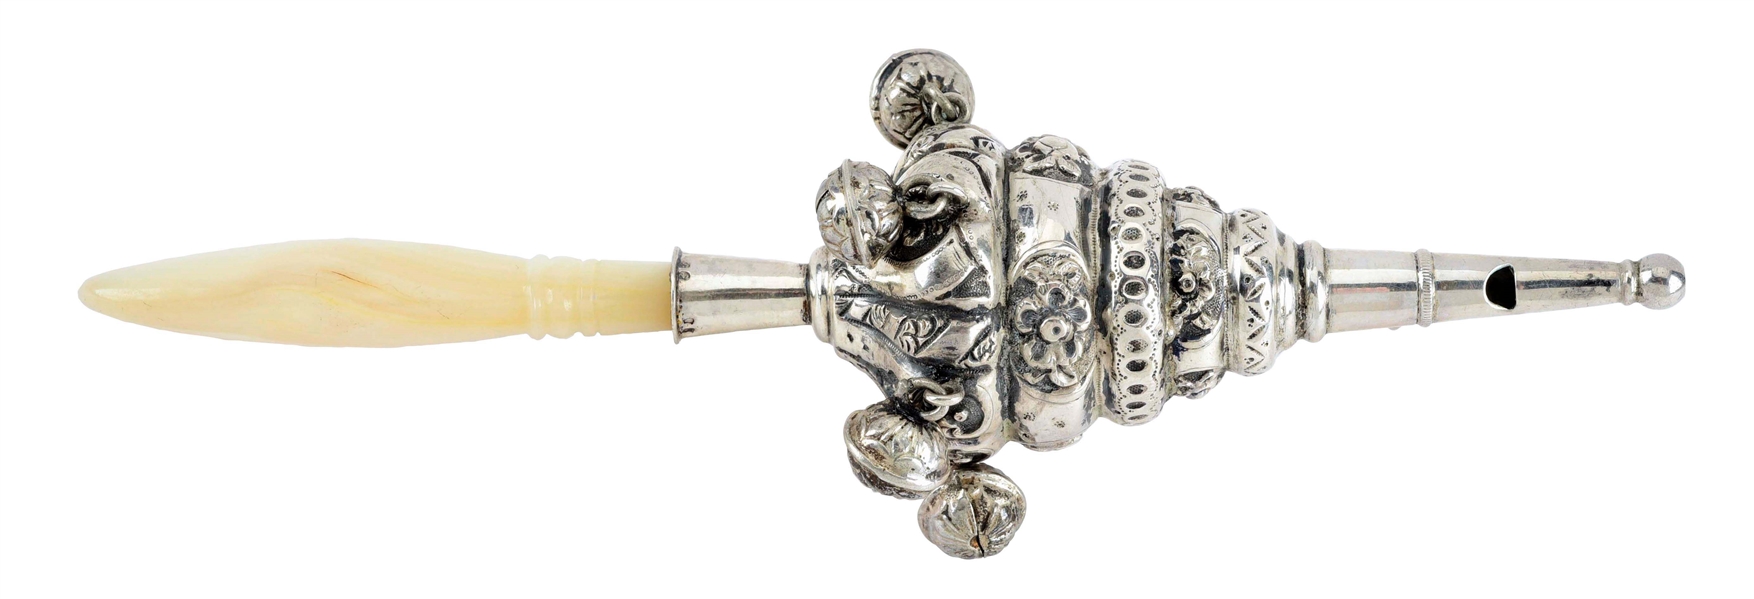 VICTORIAN STERLING SILVER BABY RATTLEWITH WHISTLE AND MOTHER OF PEARL HANDLE.